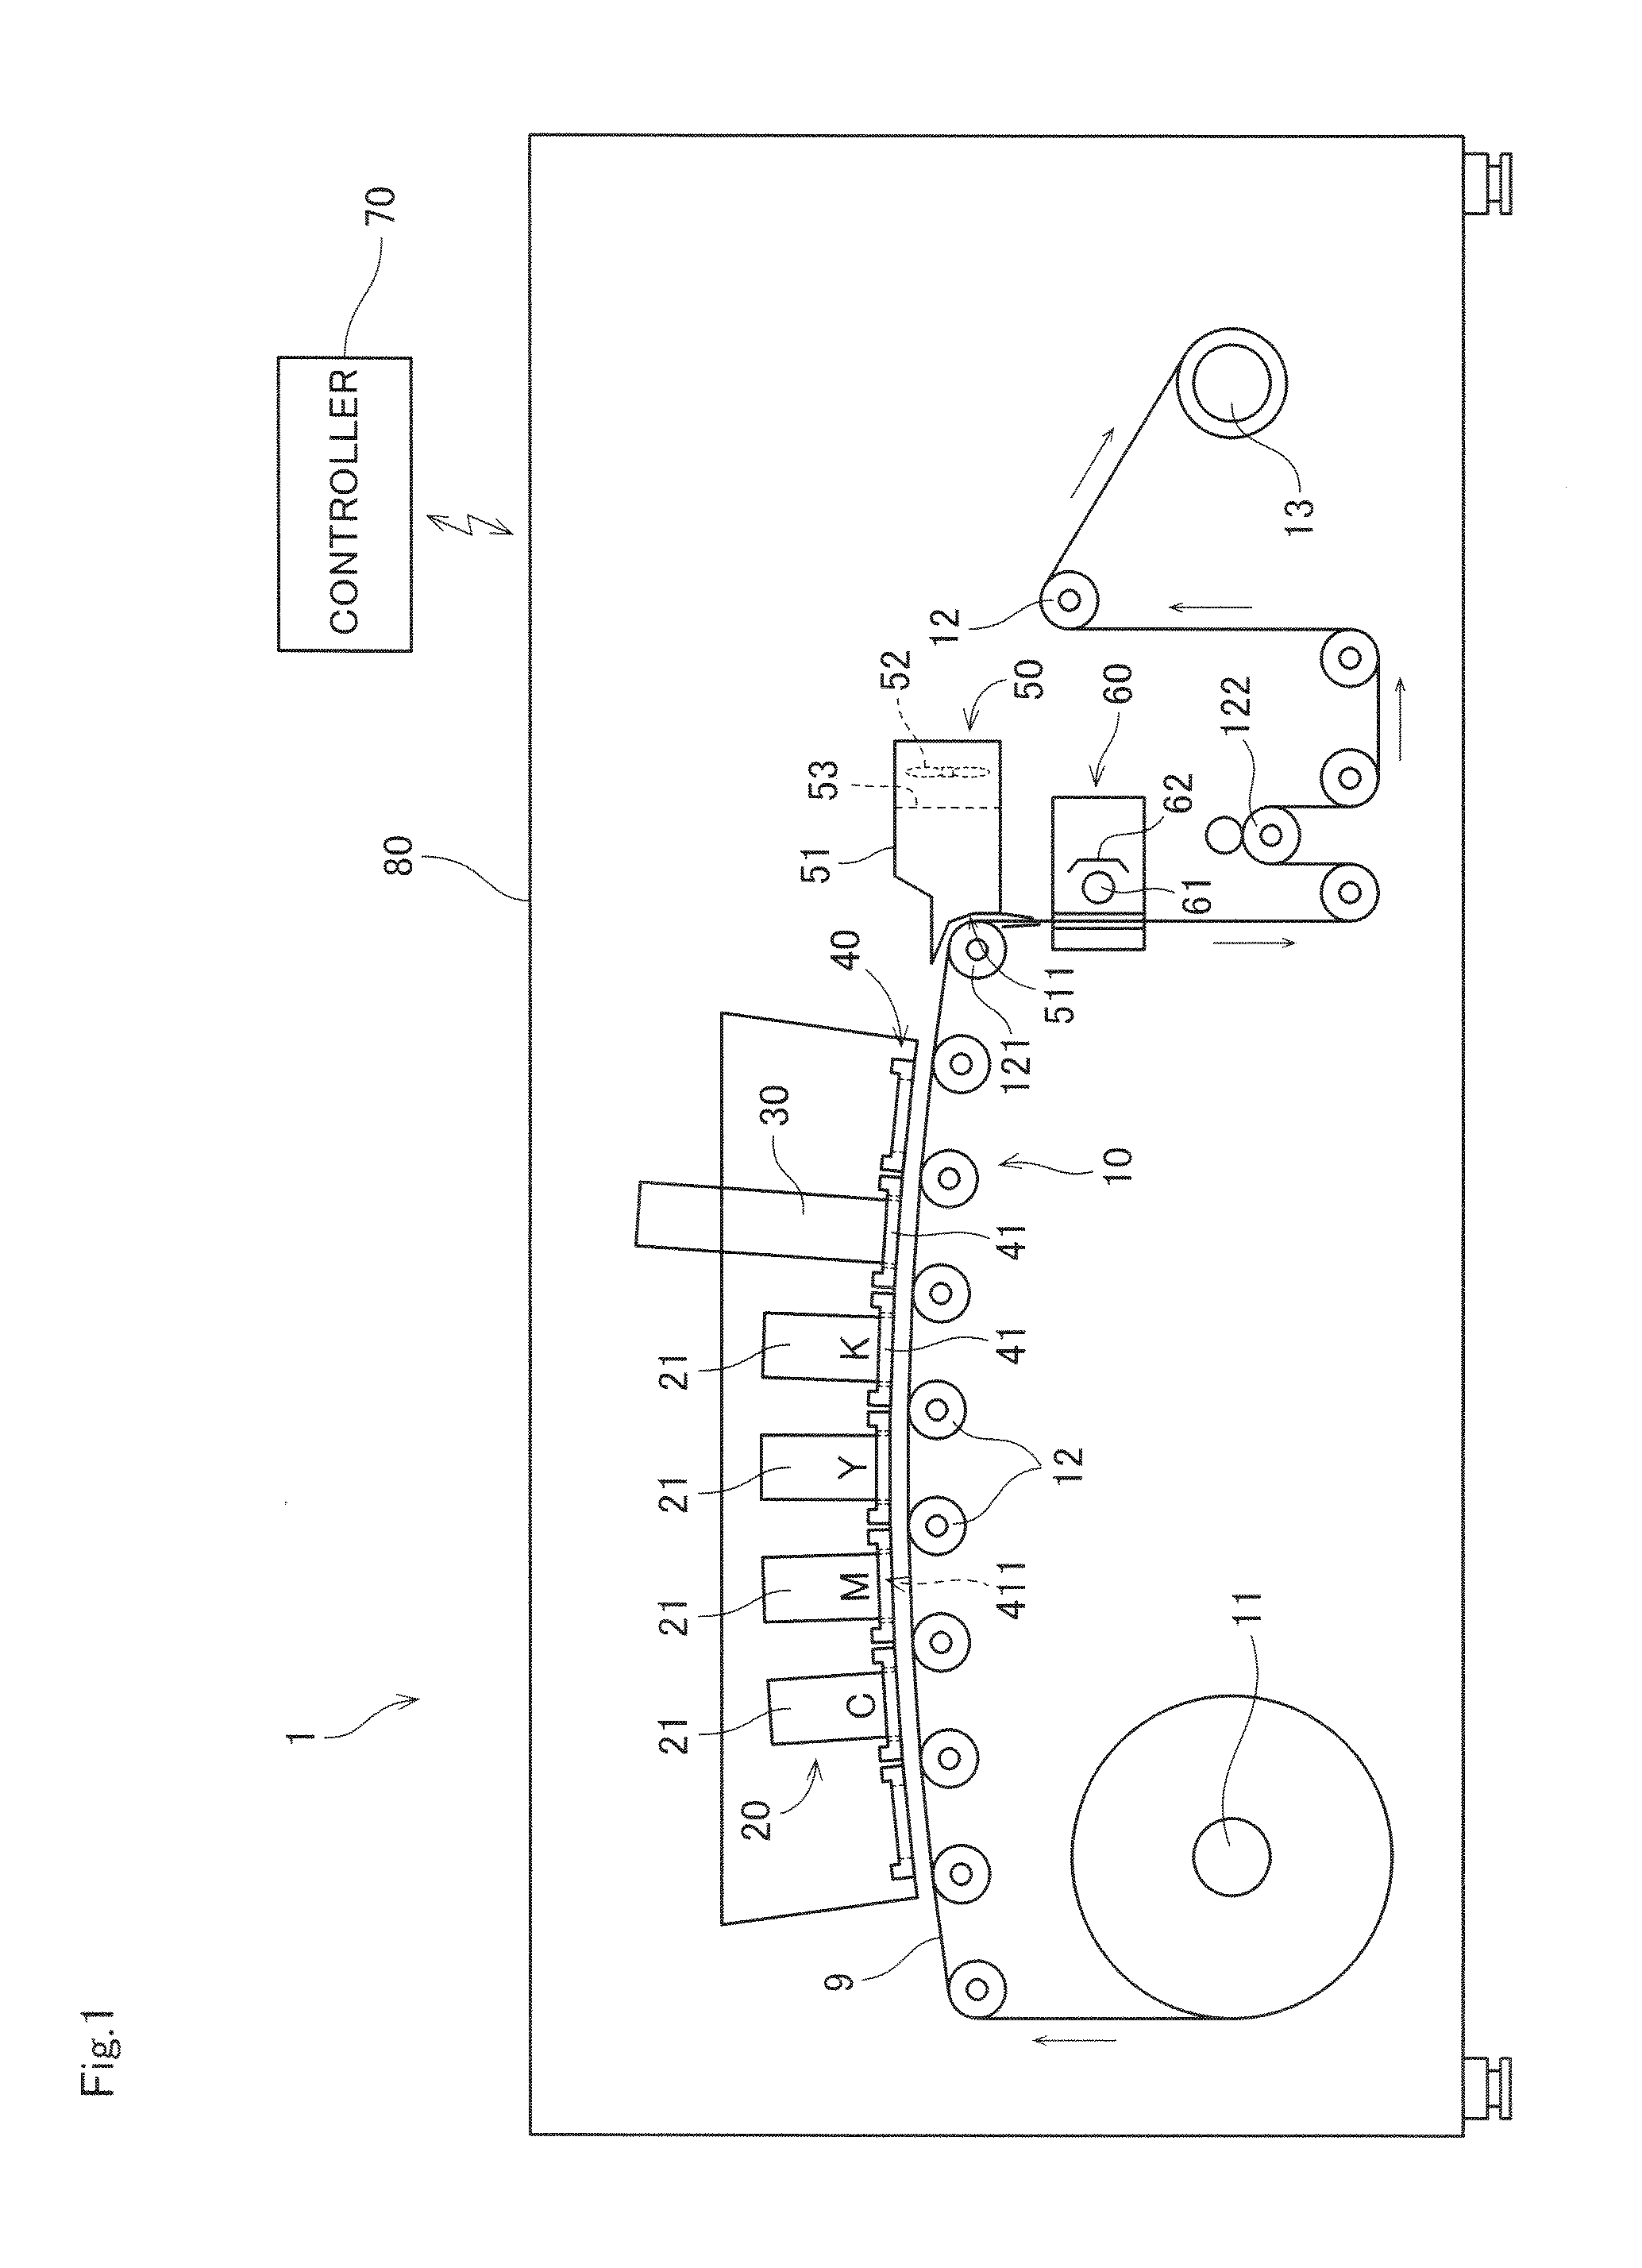 Inkjet apparatus and method of collecting mist